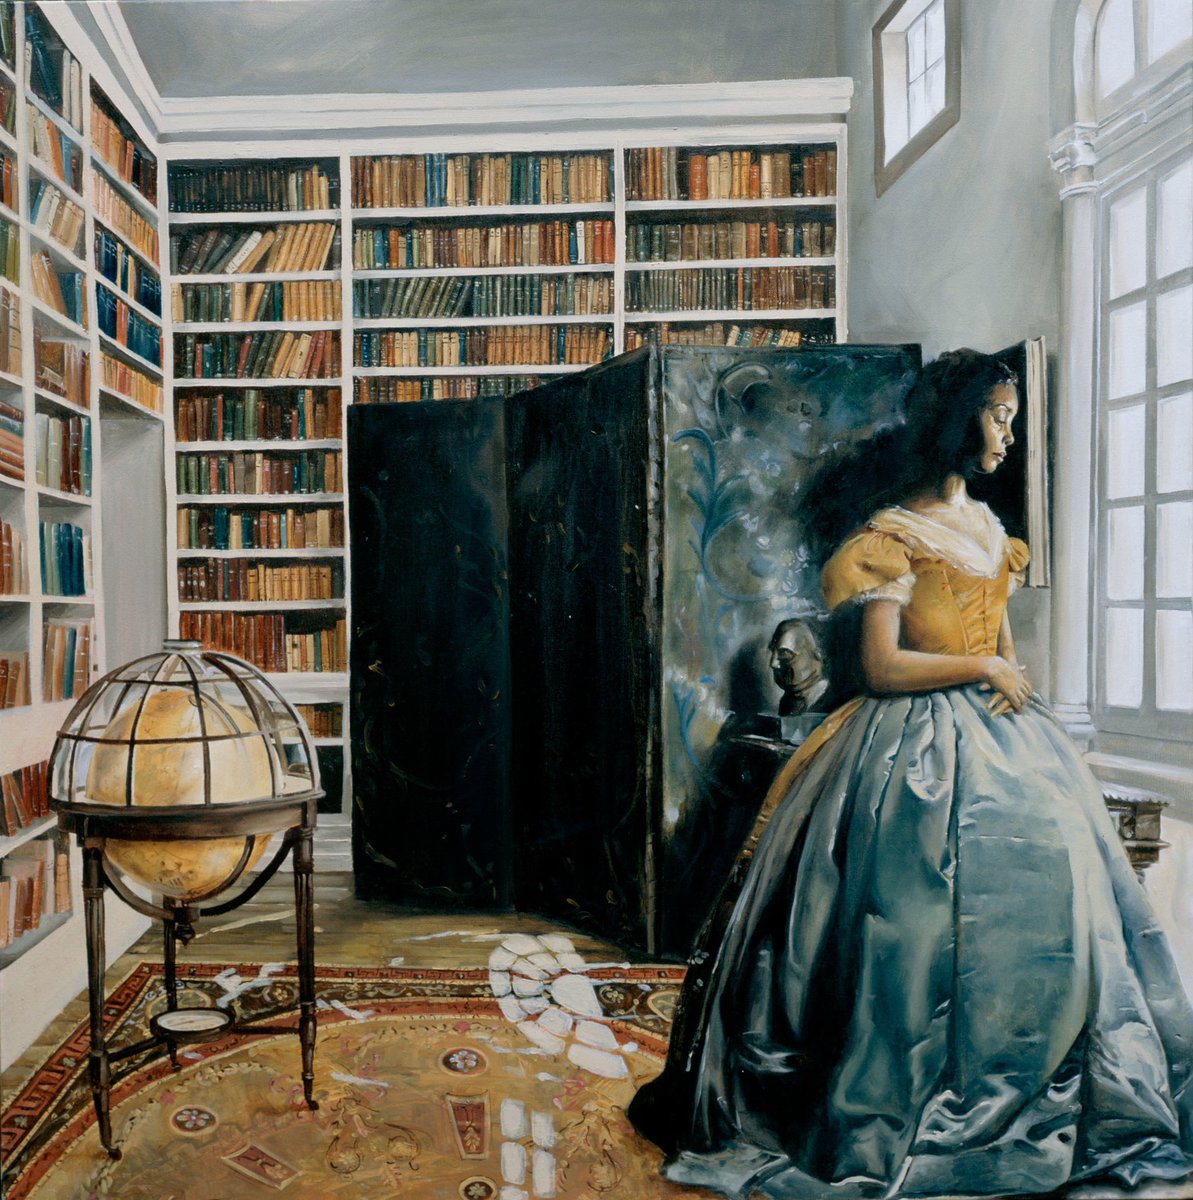 Elizabeth Colomba’s beautiful oil on canvas work — Harlem Elizabeth is described as an artist who “paints the women art history forgot”I love seeing Black women painted in this baroque style. No servants, No fetishizing, just rich fabrics + beauty